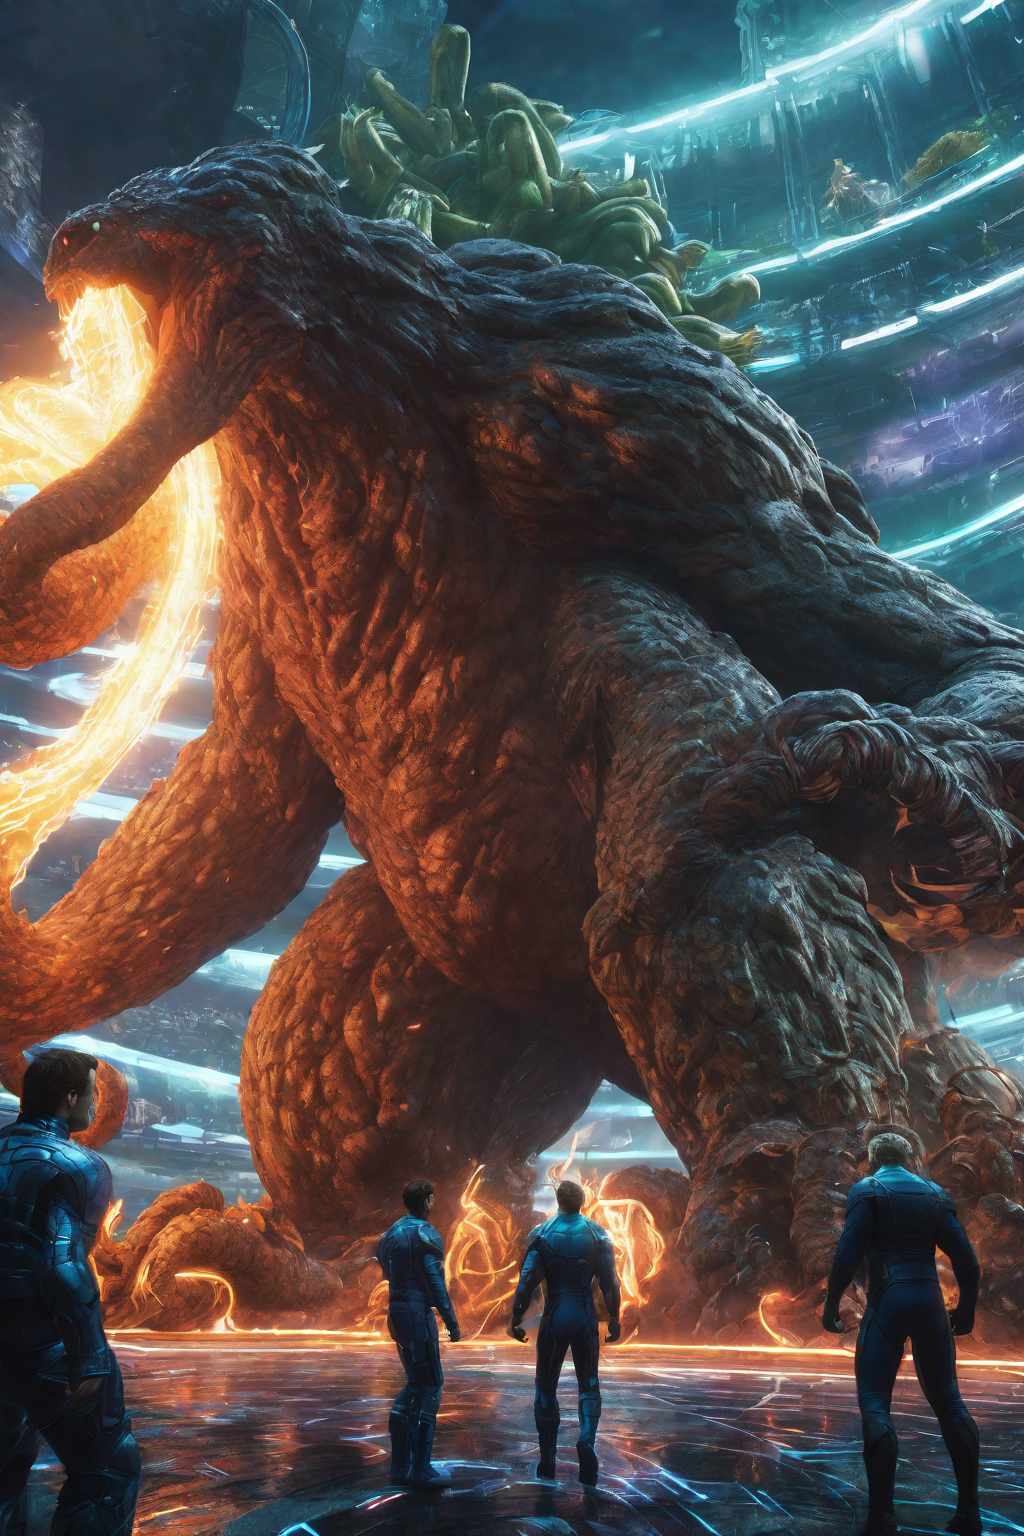  character creation detail,video game design,wide field view,the fantastic four battling a giant kraken,declan shalvey’s art style,cyberpunk, hyper realistic, 8 k,high quality, highly detailed, cinematic